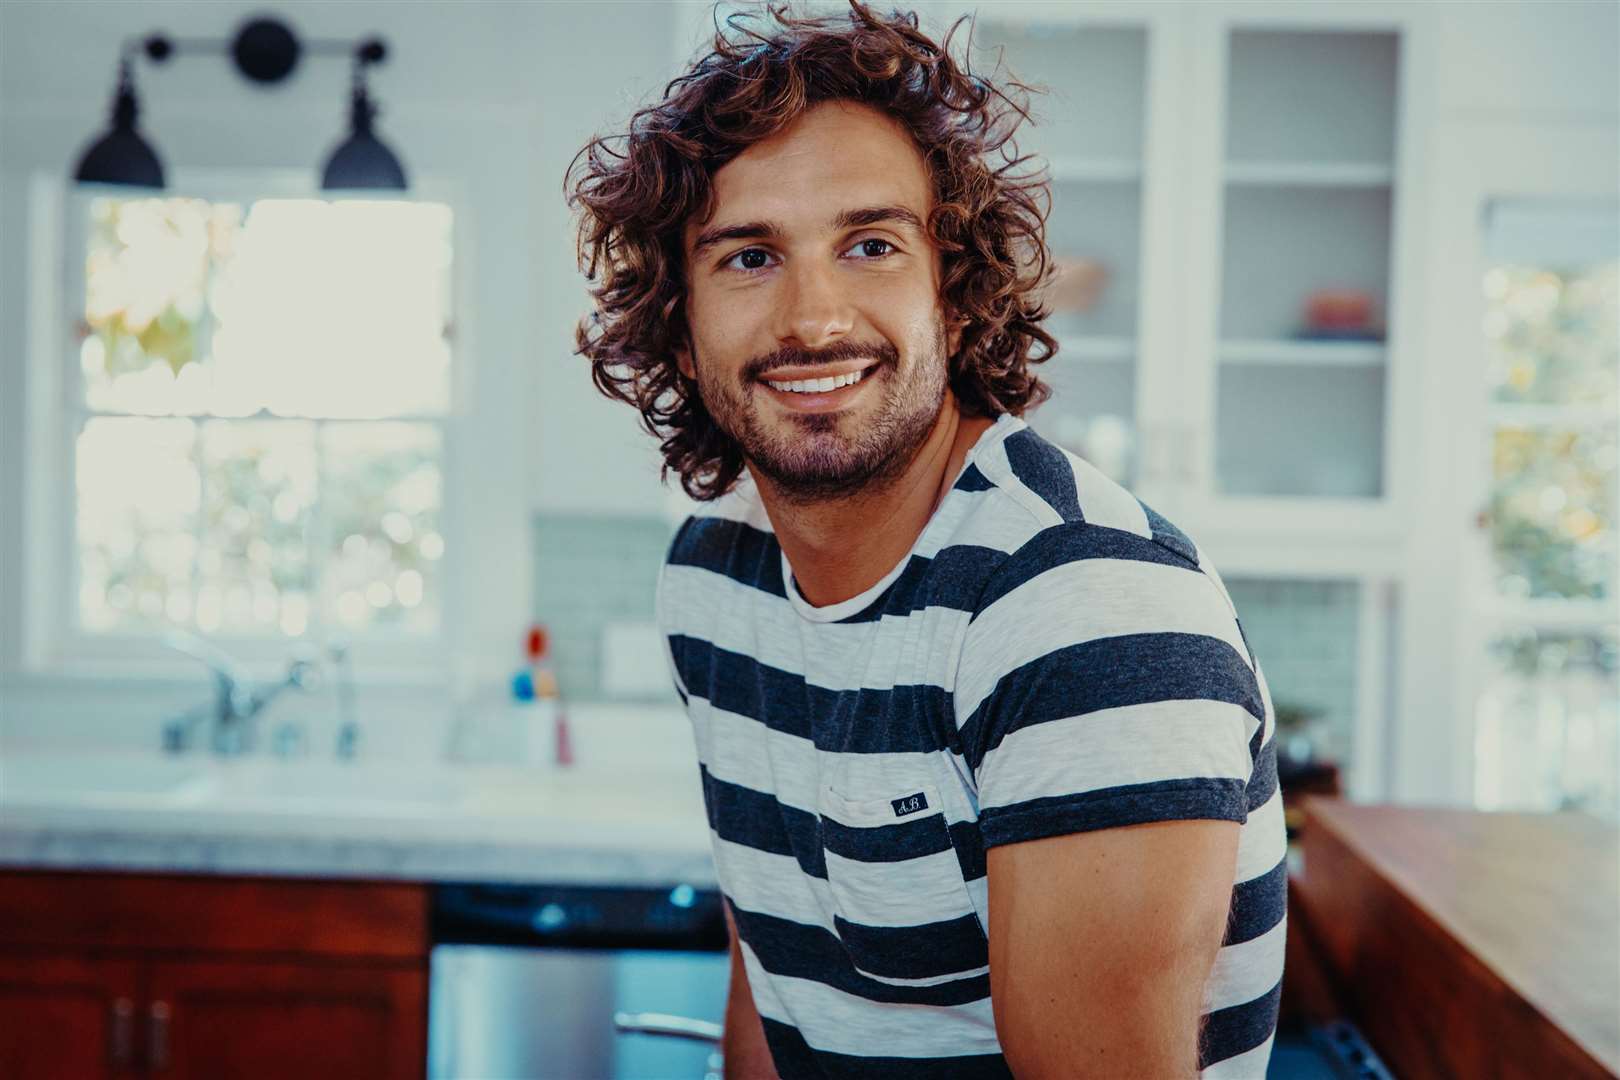 Joe Wicks is uploading daily PE lessons for children – and grown-ups – to follow at home.